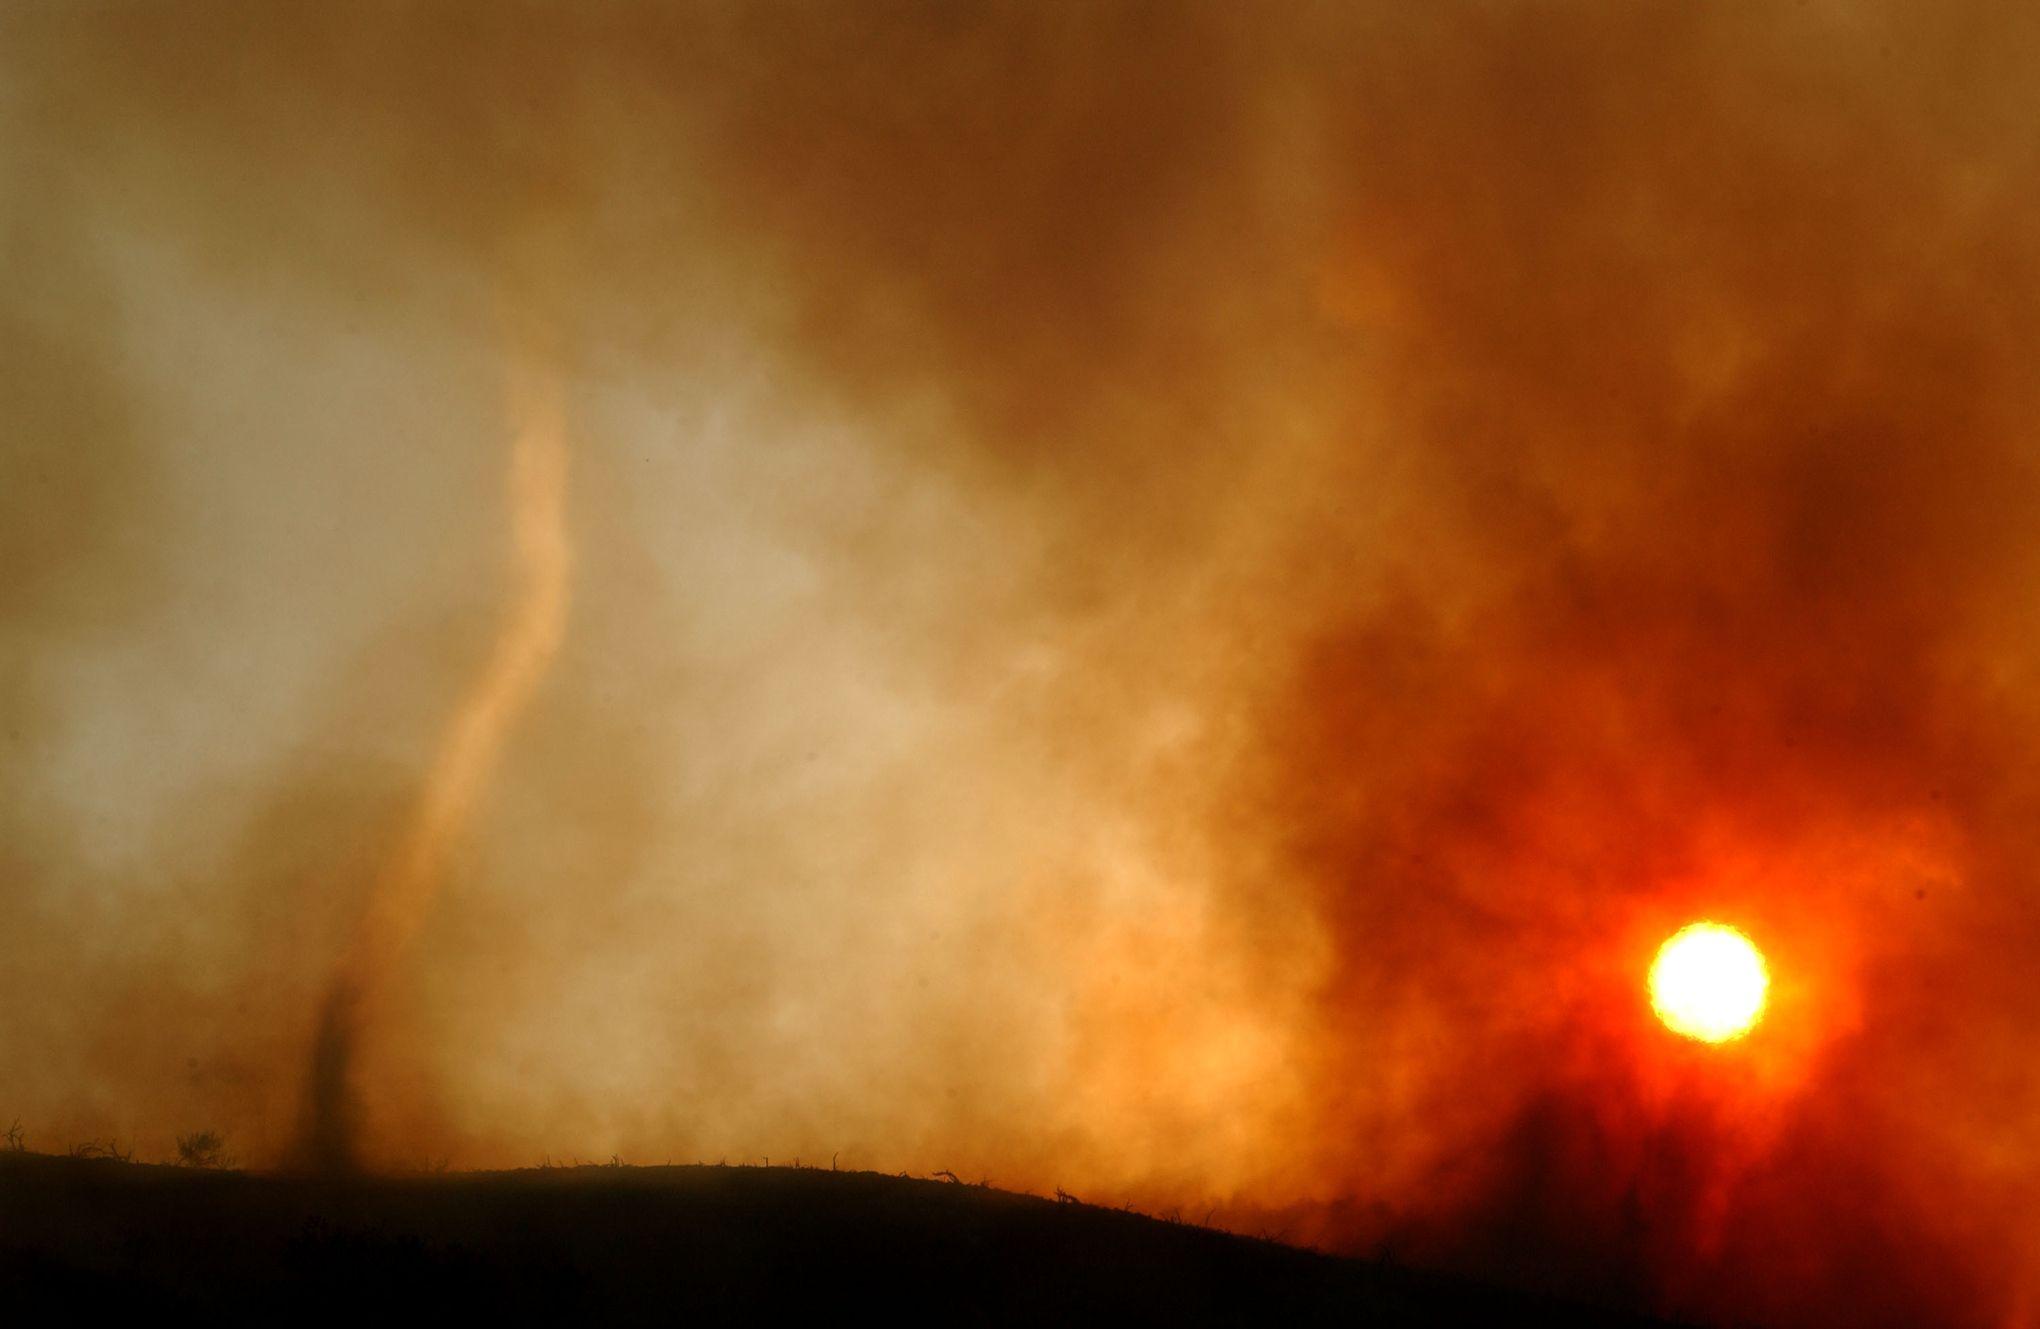 A fire tornado formed yesterday in California